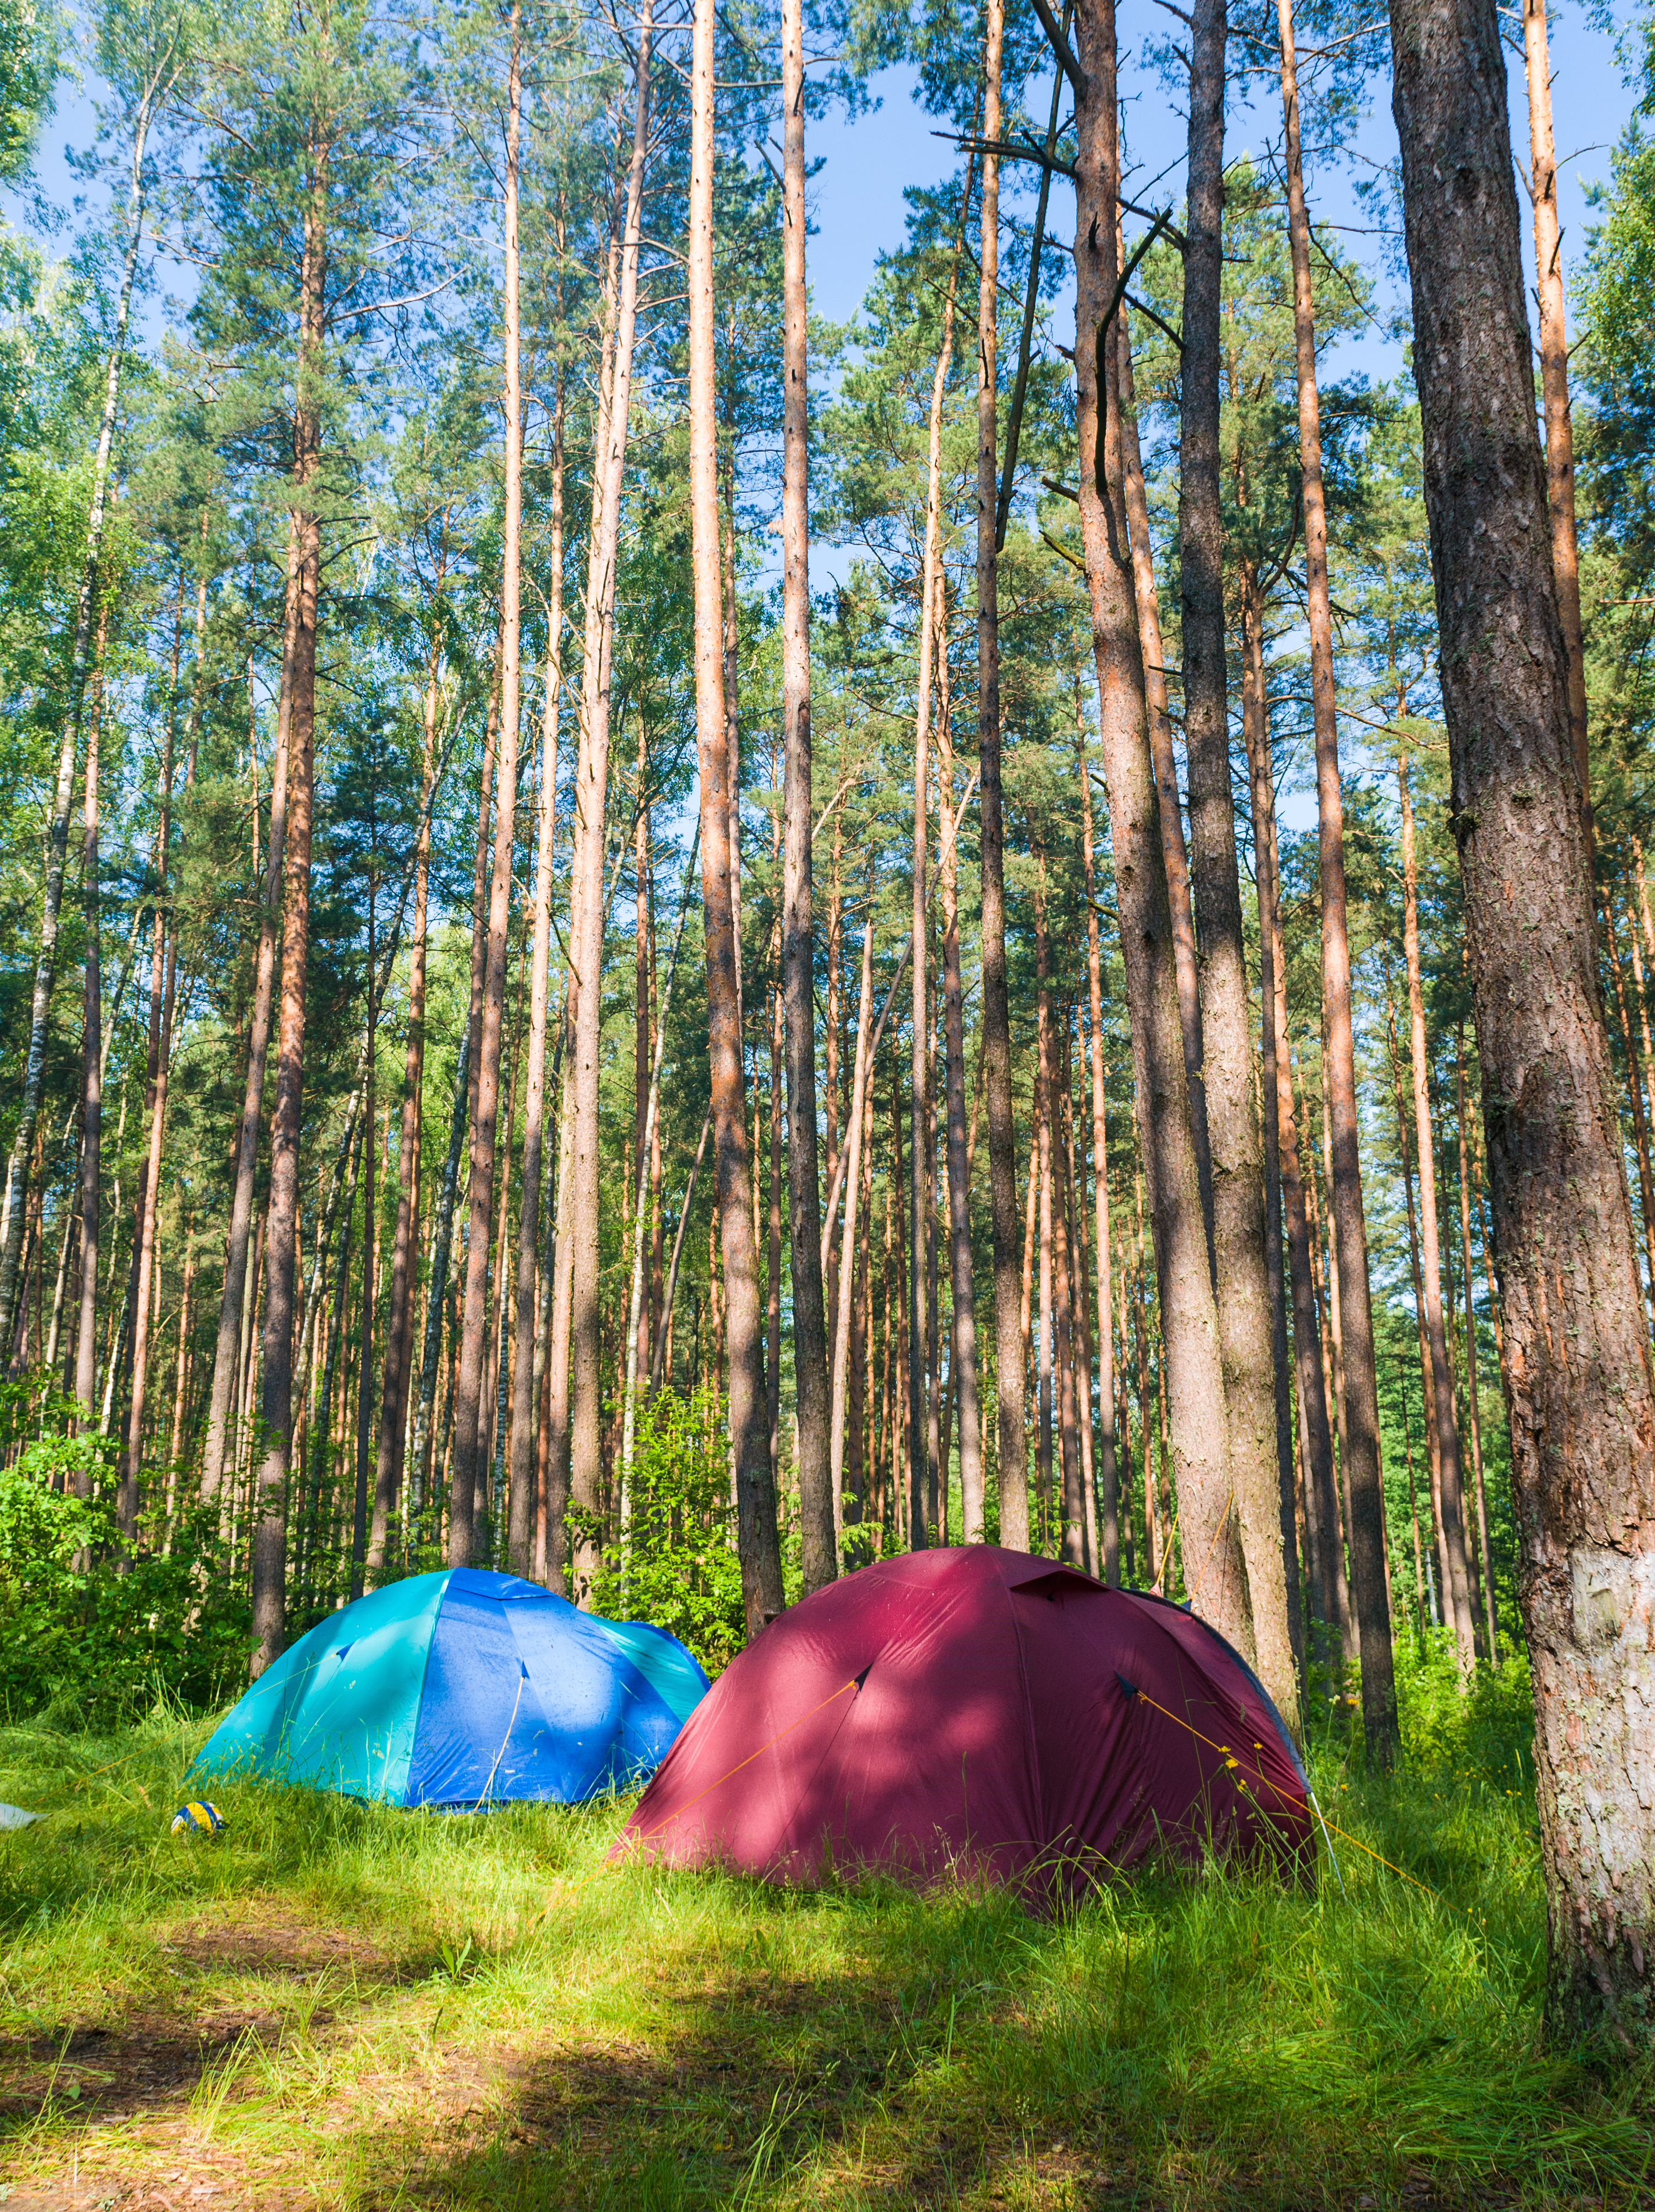 Camping in the forest. Flått